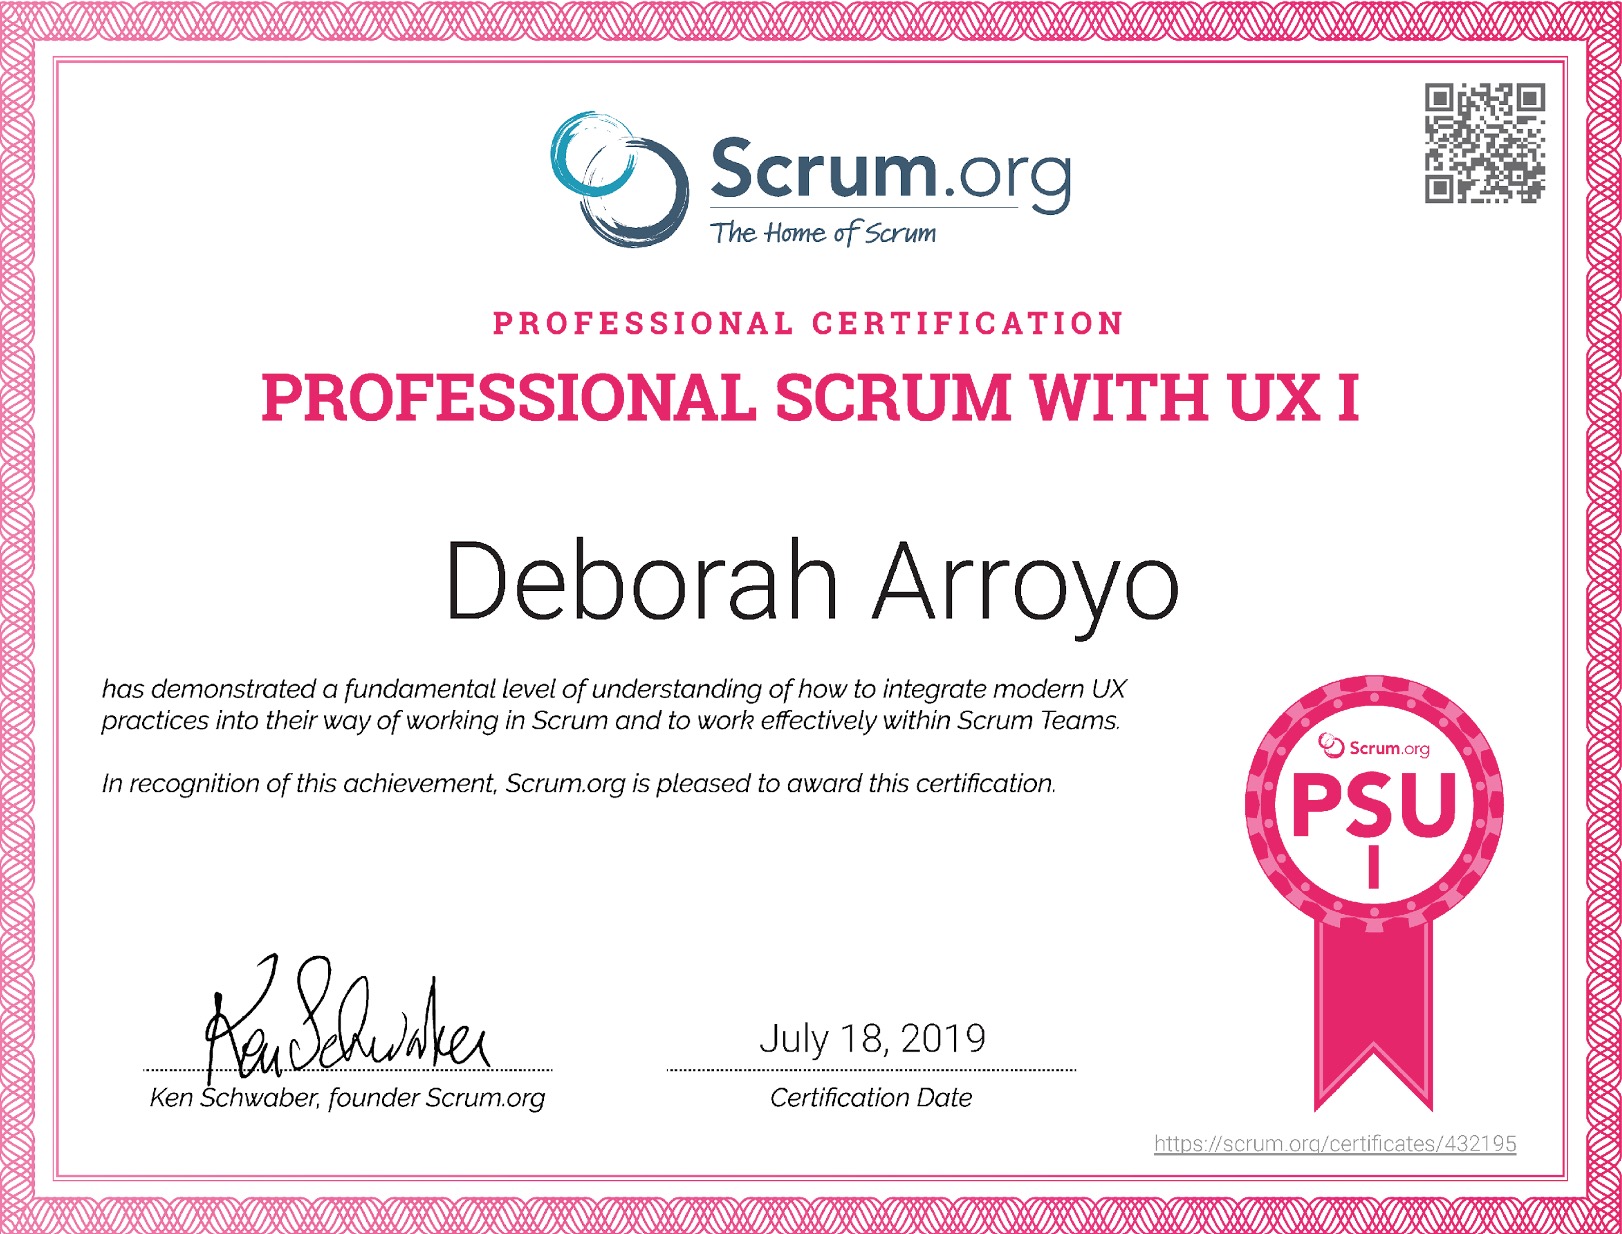 Scrum.org with UX Certified